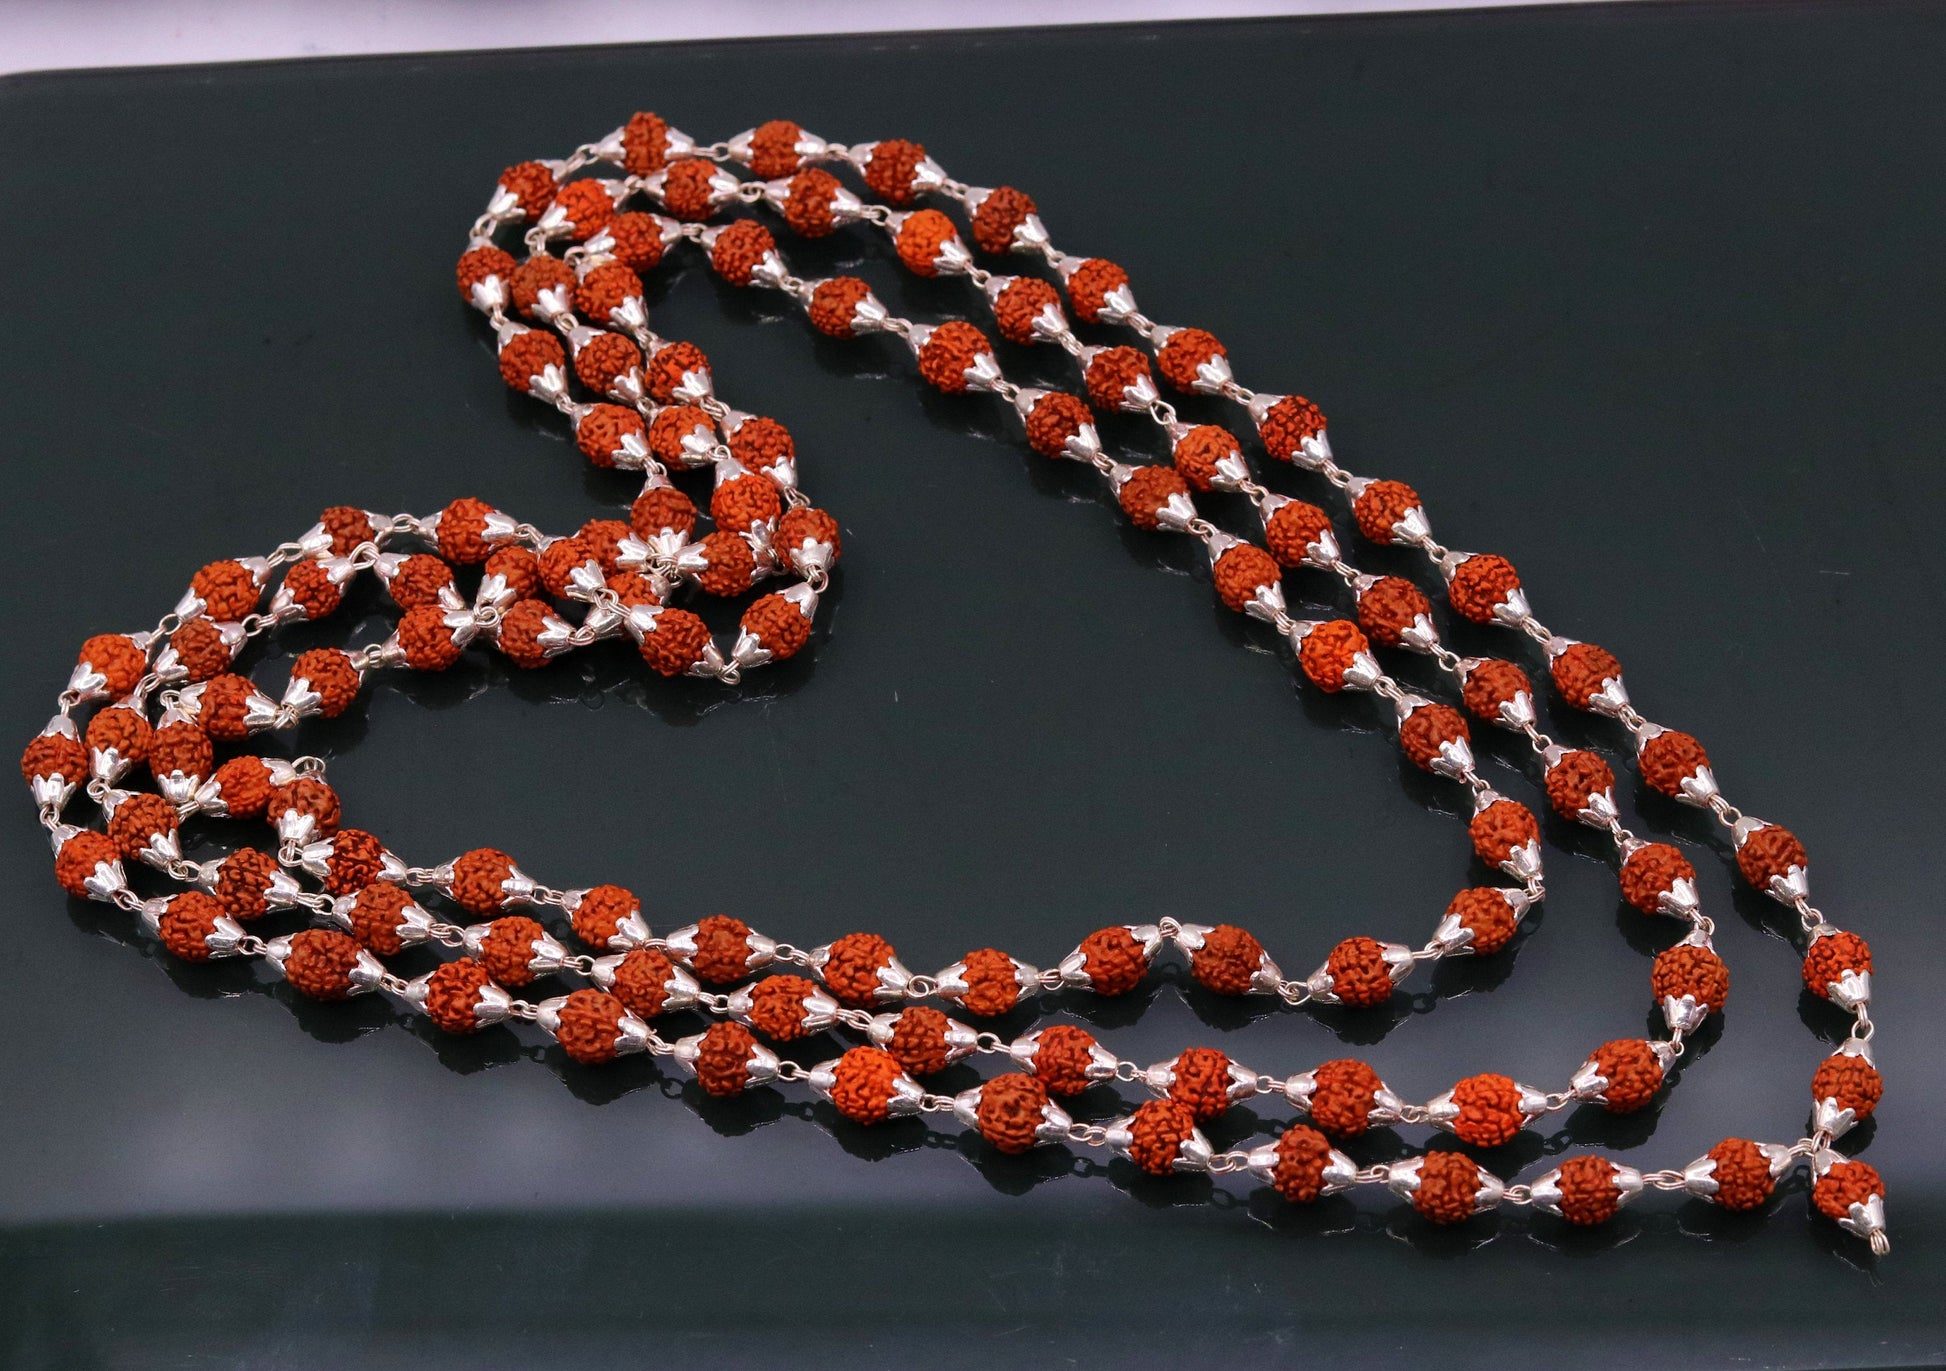 7 mm natural Rudraksha beads seeds Vintage design Sterling silver 108 beads chain necklace for japping mantra to pray the god jewelry ch61 - TRIBAL ORNAMENTS